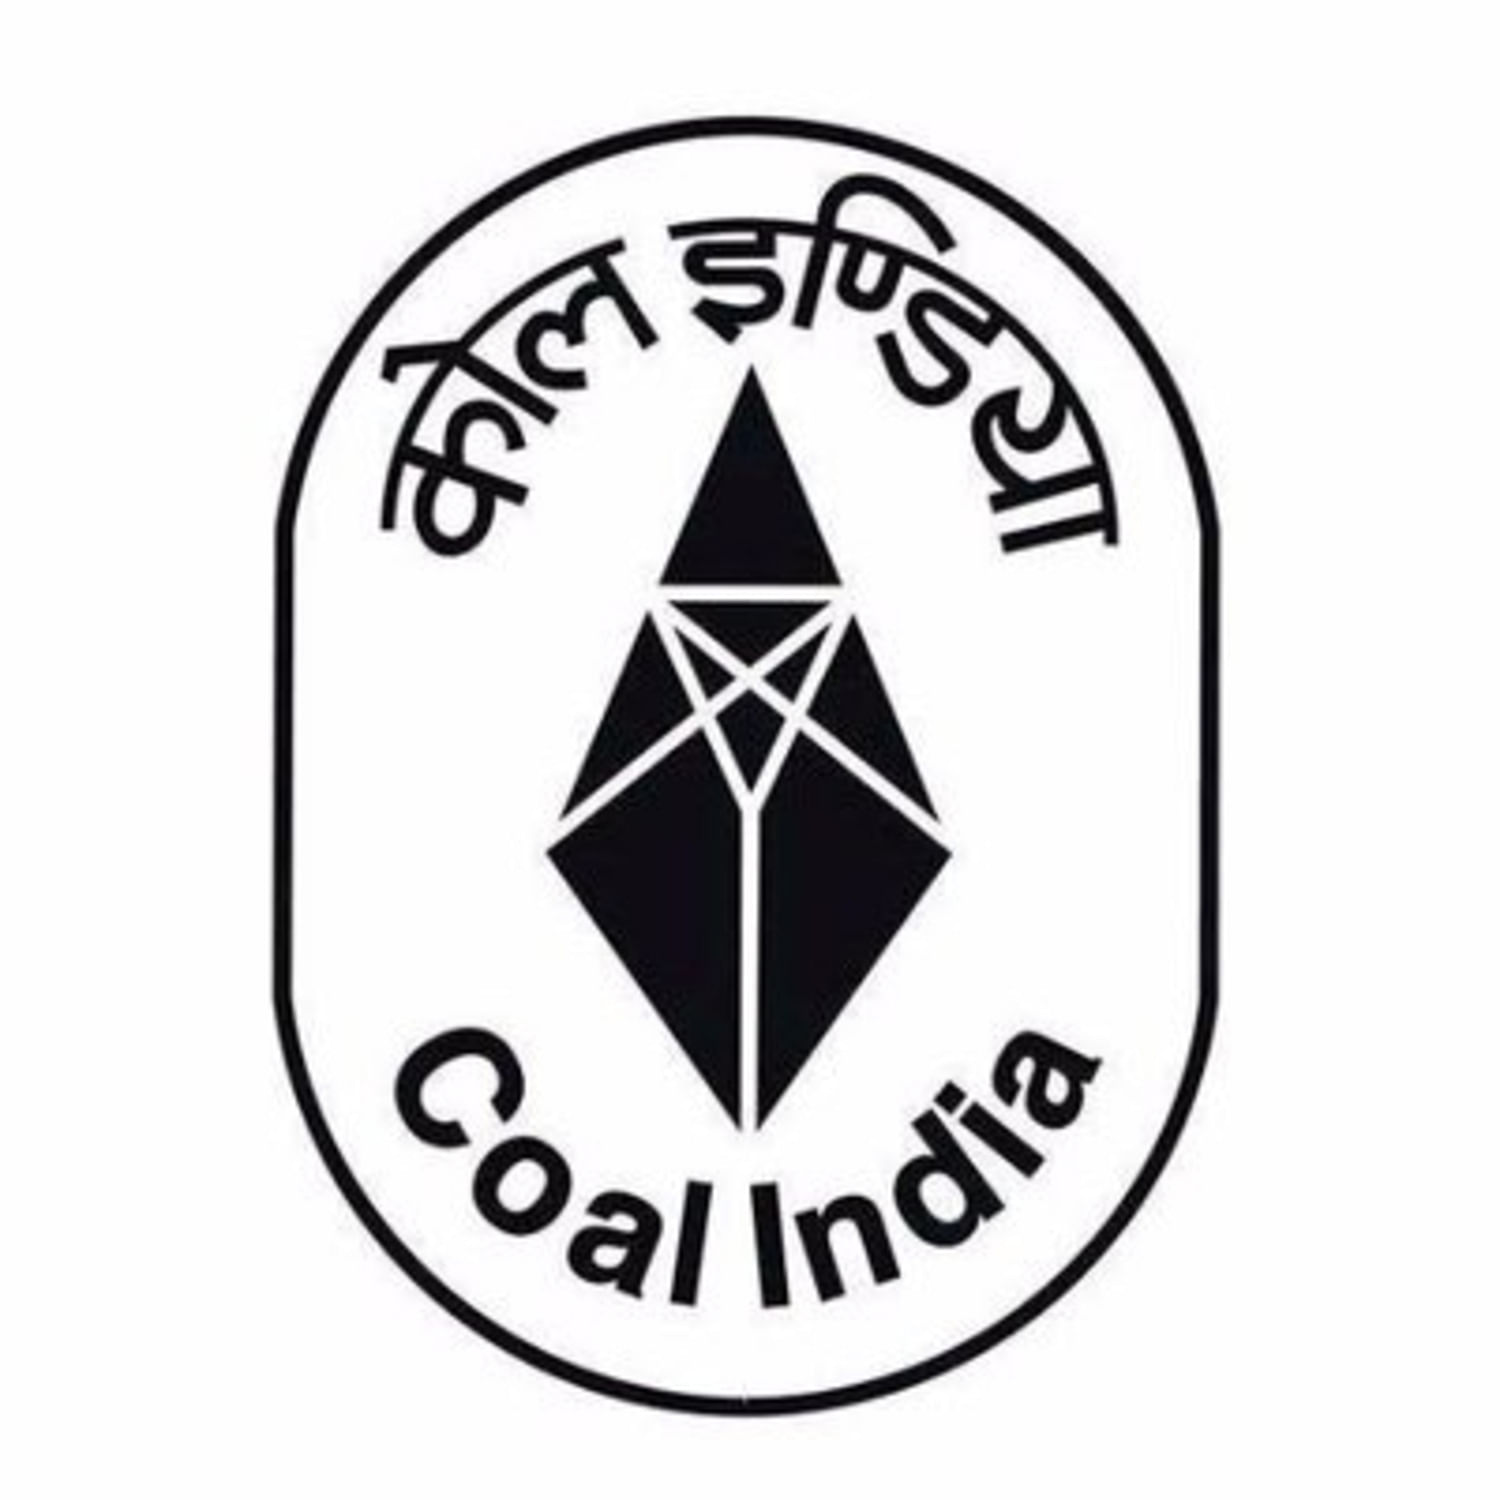 Coal India trade unions started their three-day strike, protesting against the Centre's decision to allow commercial mining, on Thursday, which is likely to hit around four million tonnes of production.